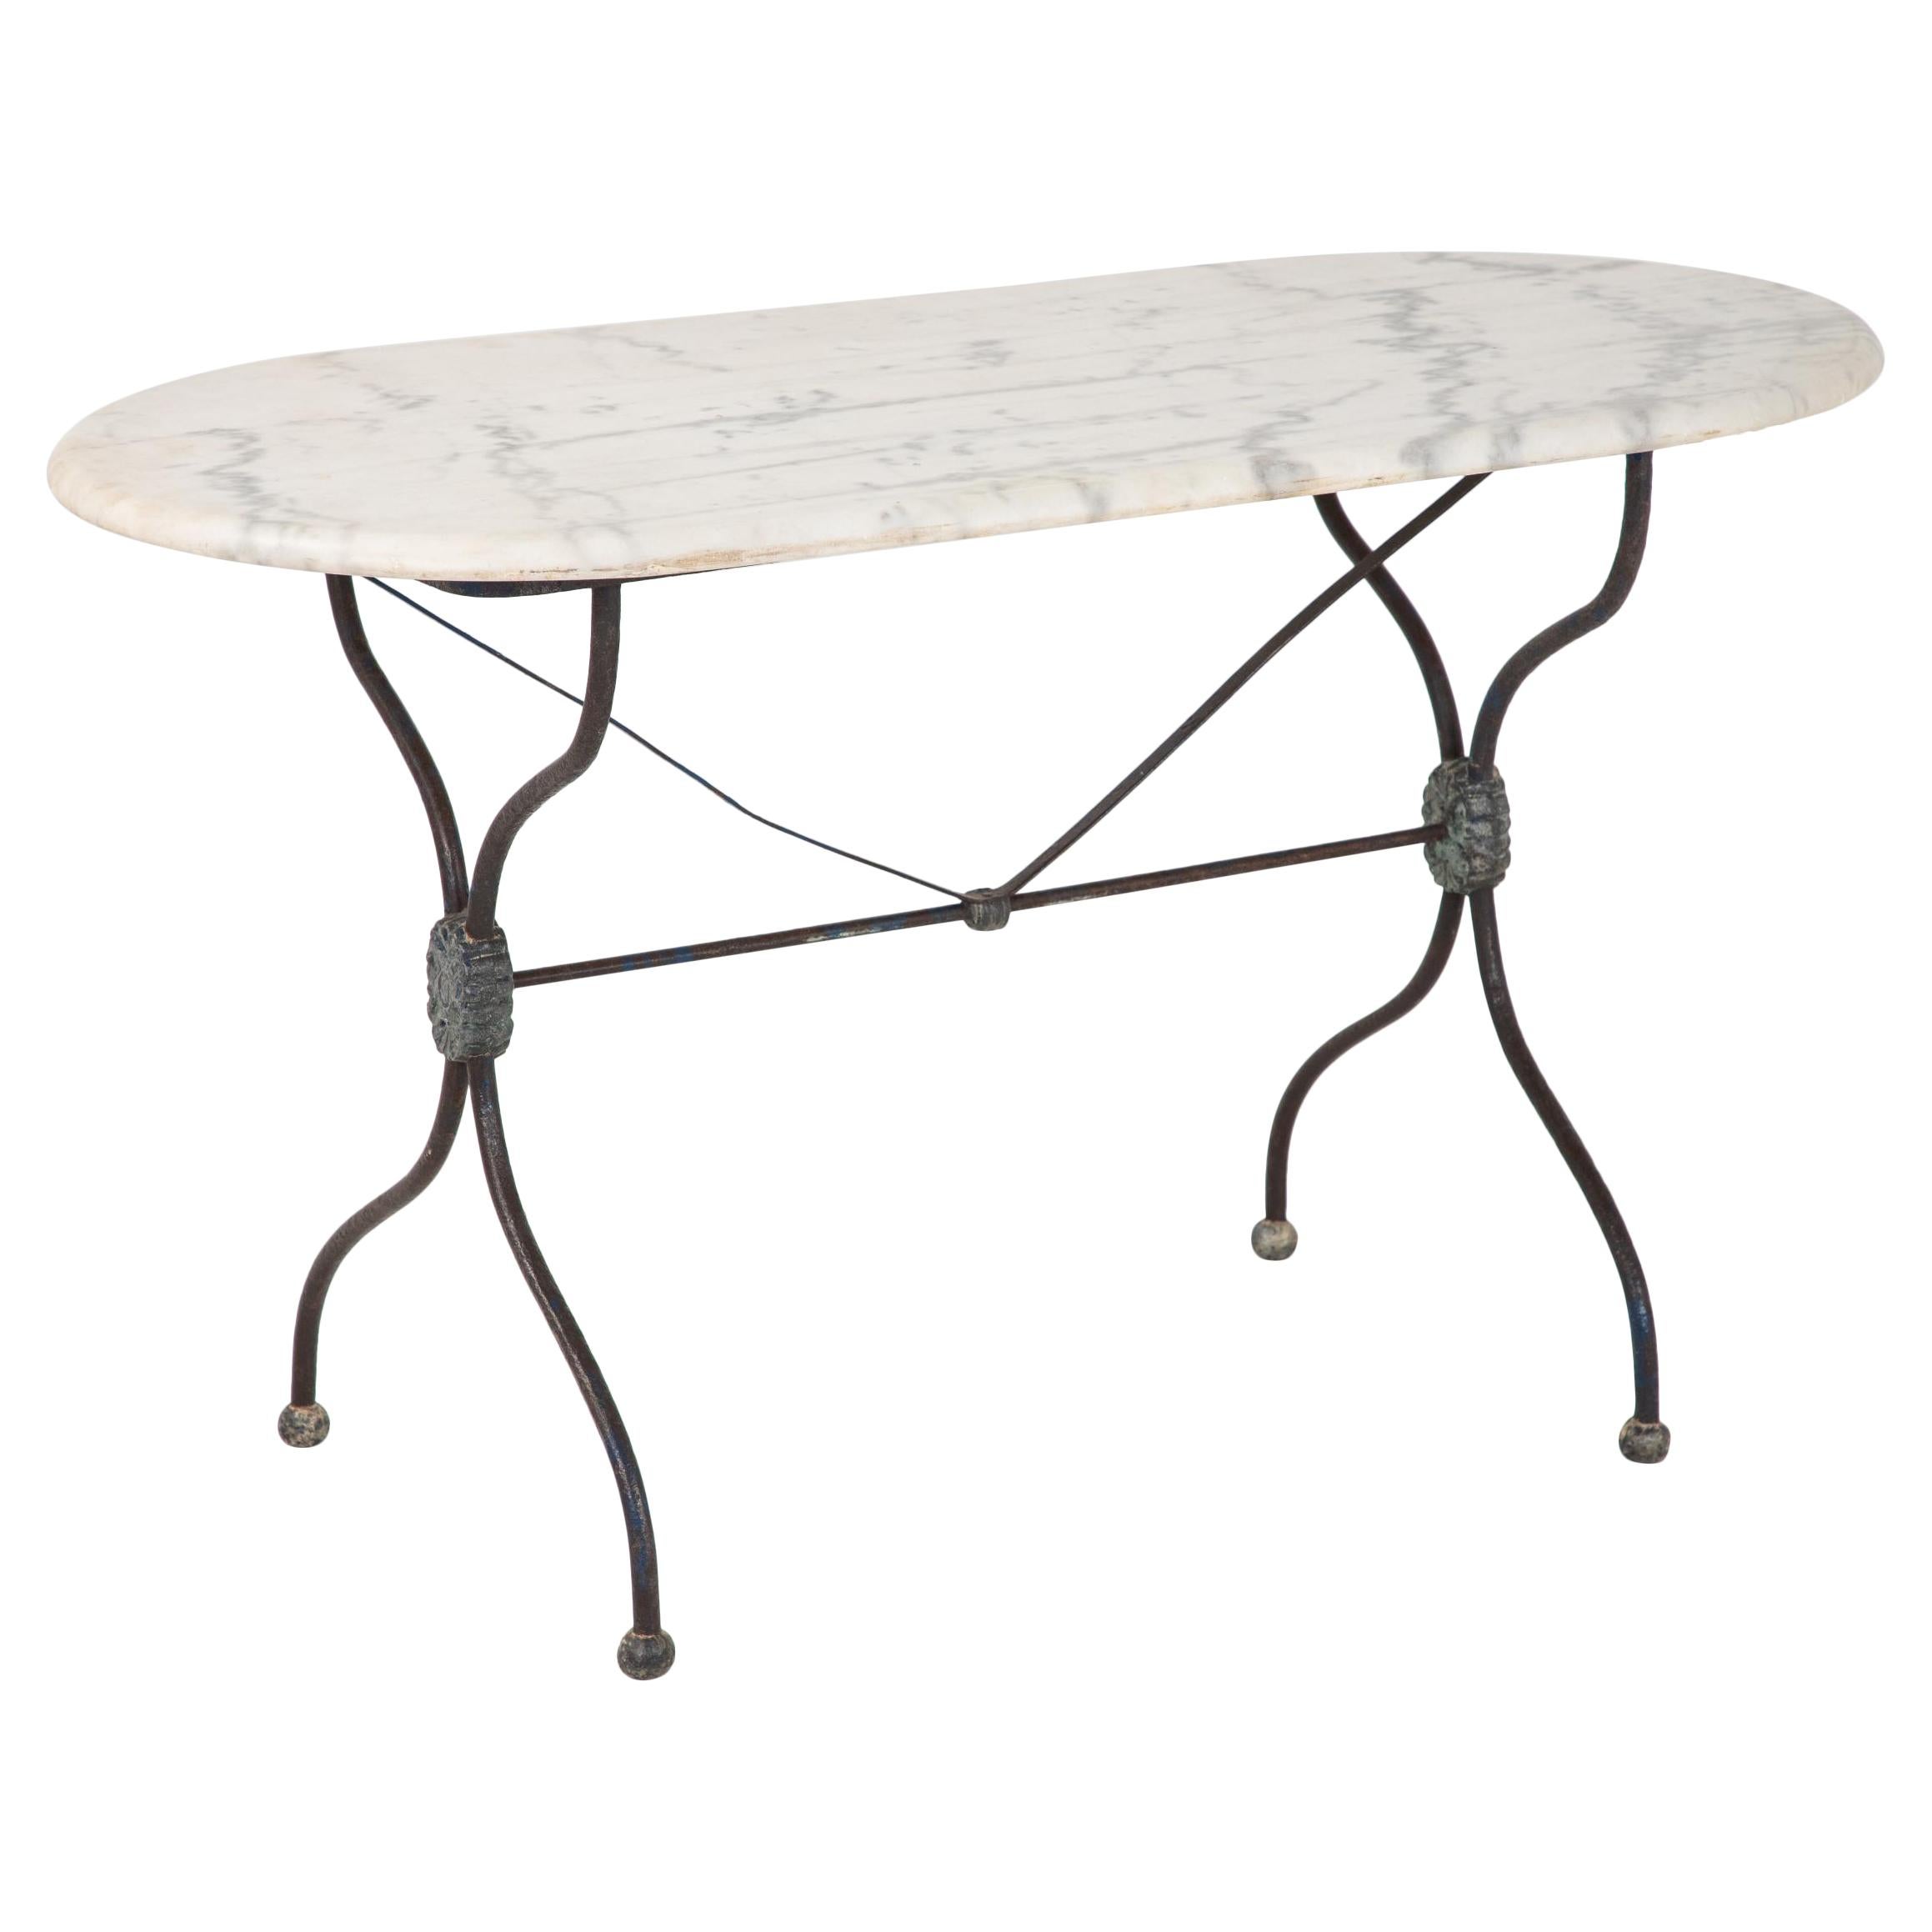 French Patisserie Table with Marble